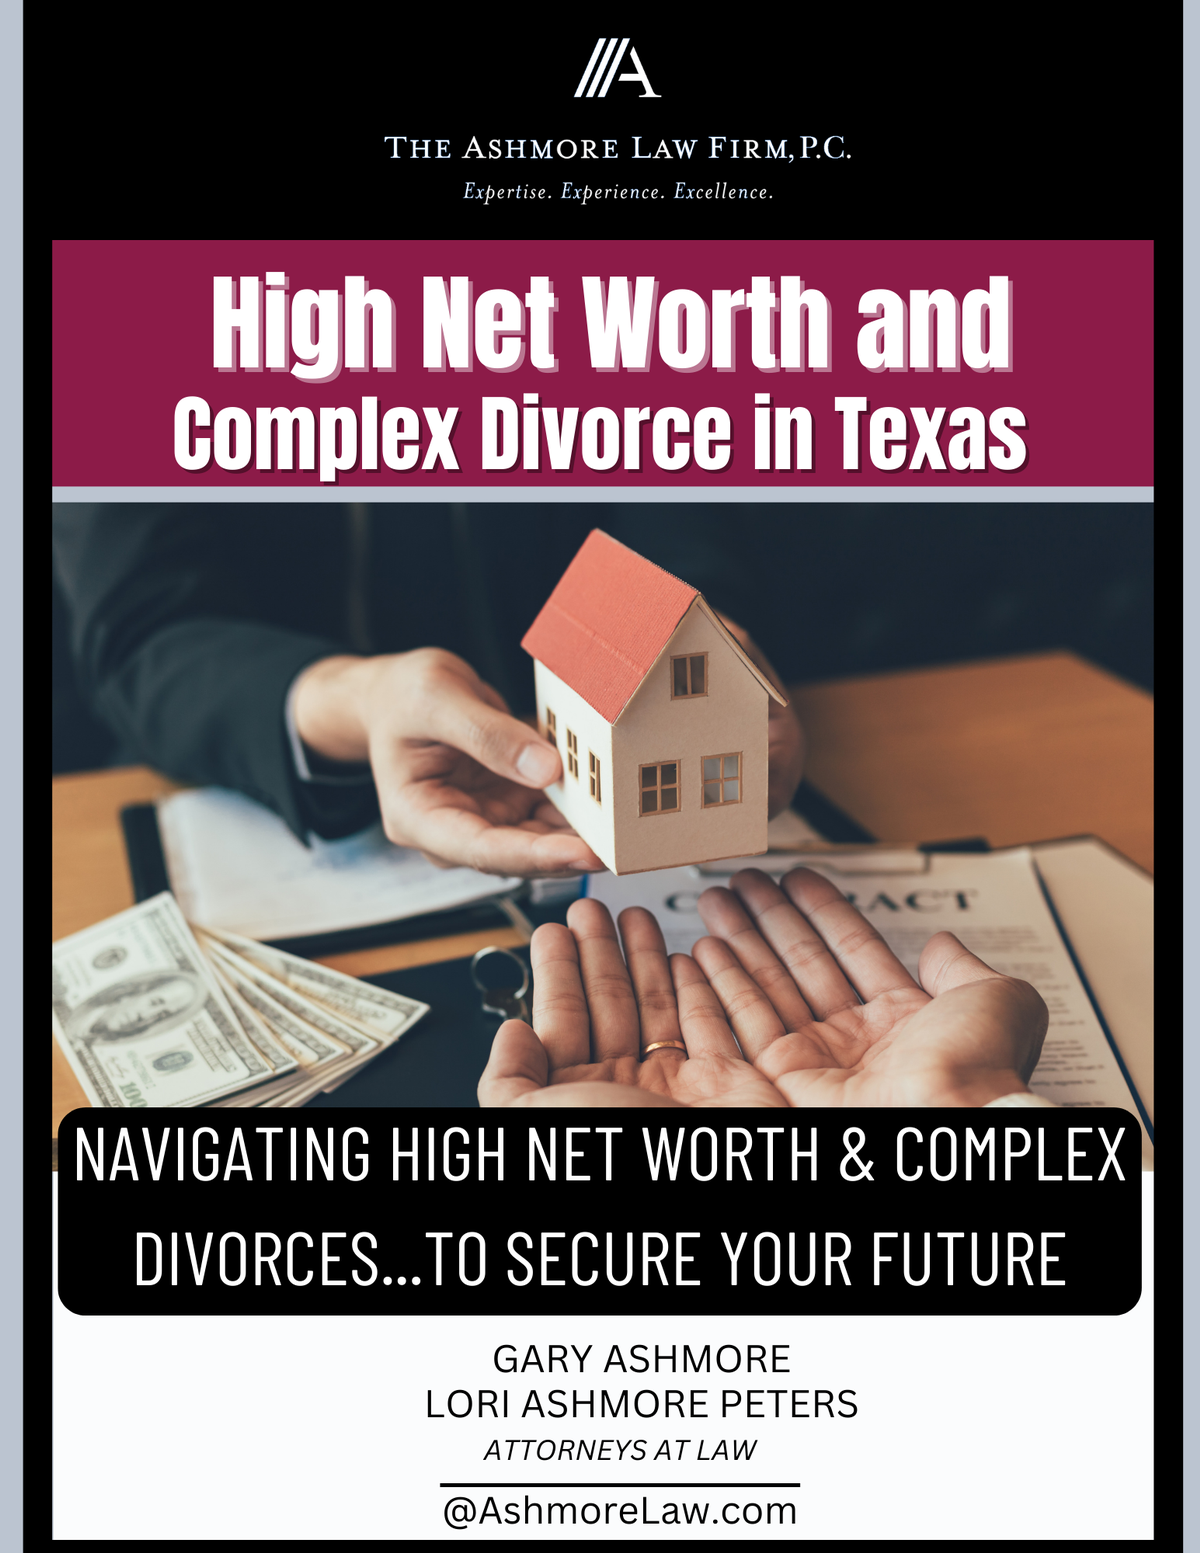 High Net Worth and Complex Divorce in Dallas, Park Cities and Highland Park, TX Requires Knowledge, Expertise and Specific Strategies